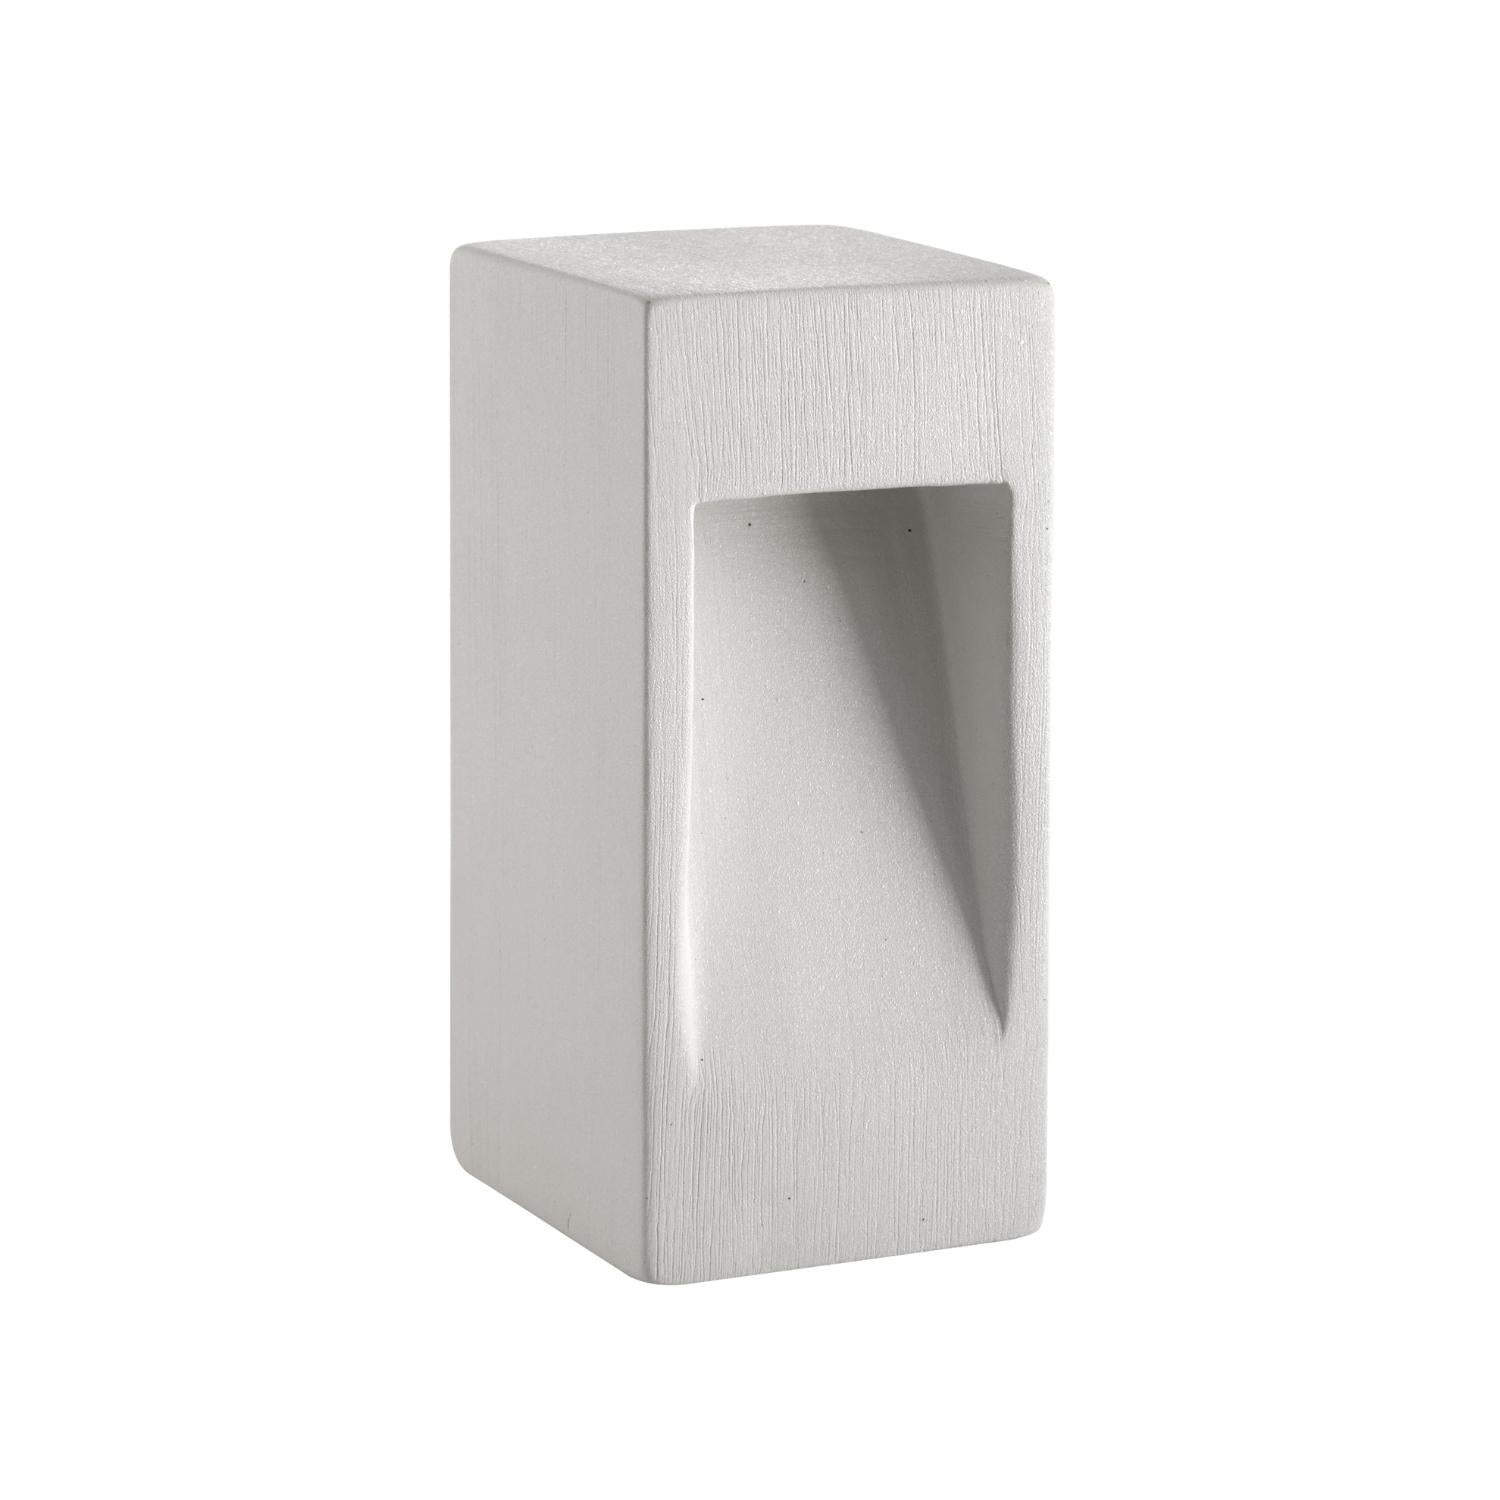 Geo Contemporary - A547 - Lind Wall Sconce - Lind - White